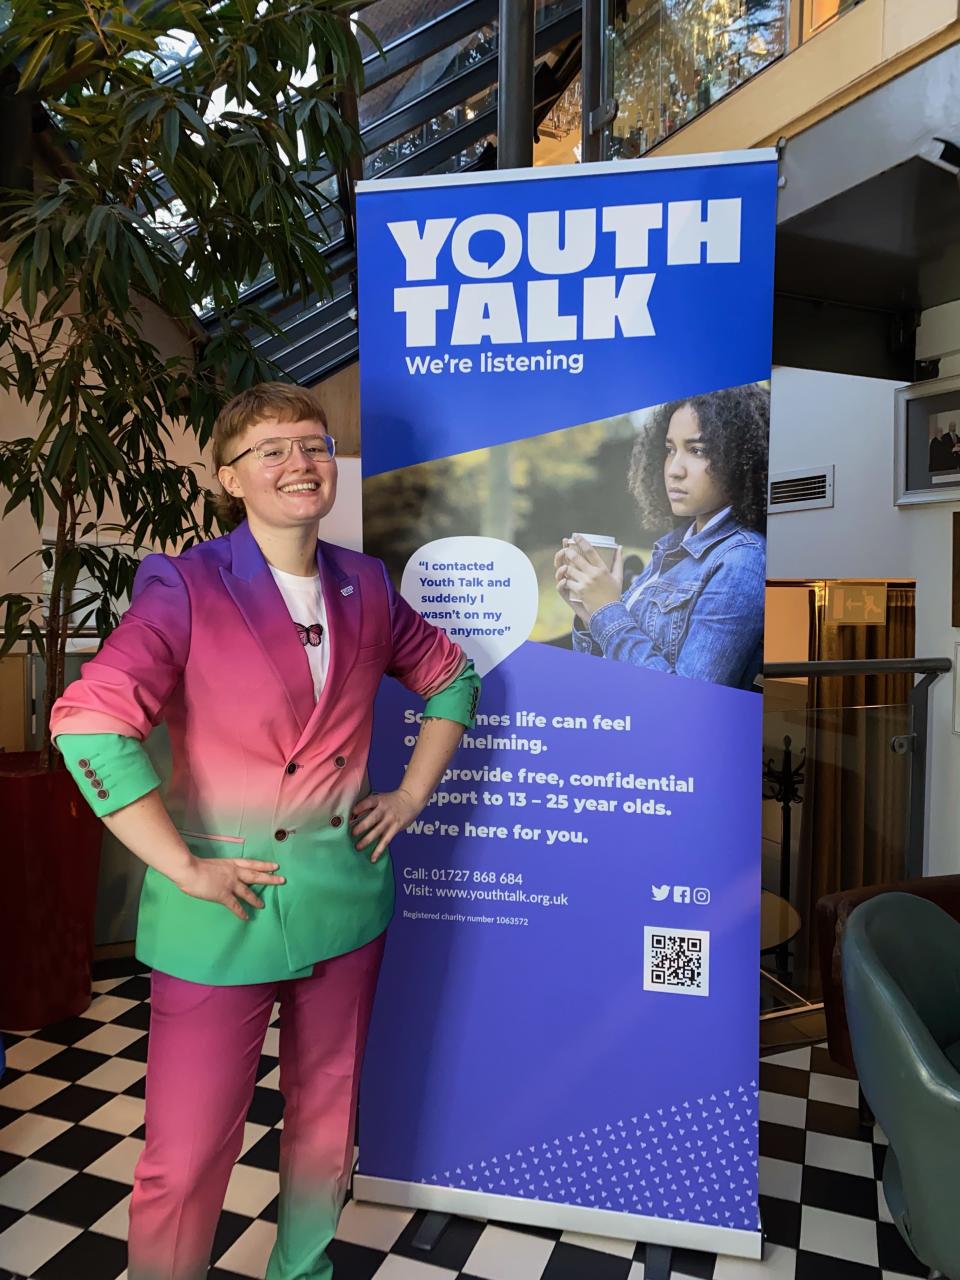 Mia Arundel works with Youth Talk to help support other young people. (Supplied)